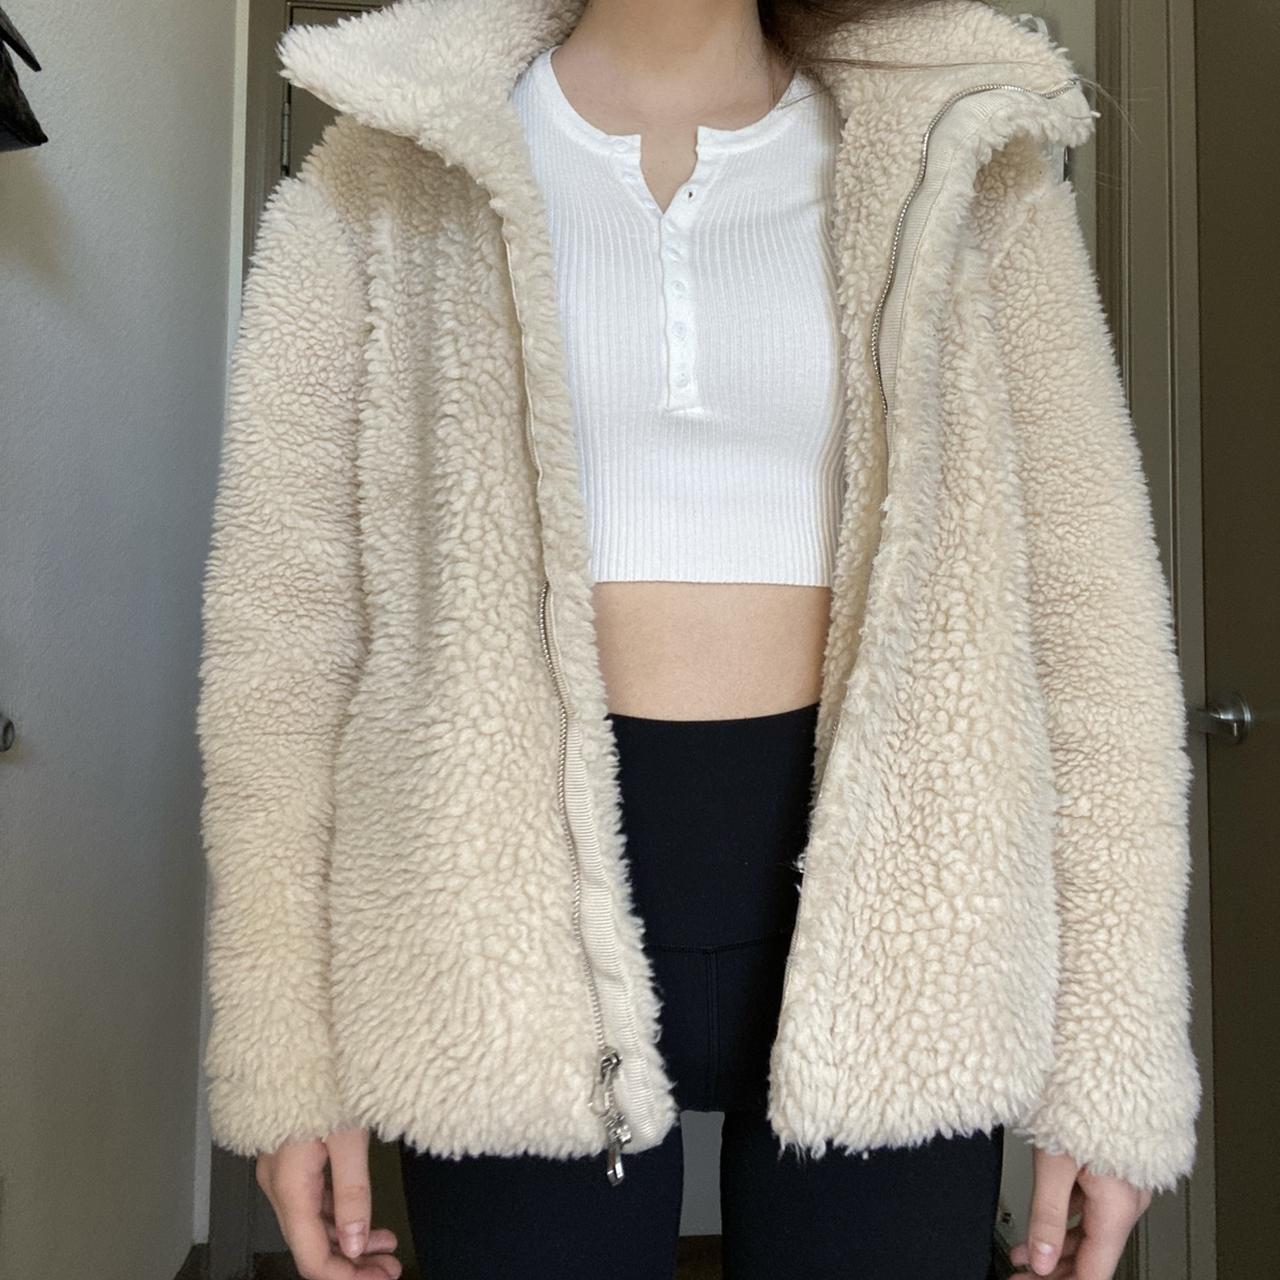 PacSun Women's Tan and Cream Jacket (4)